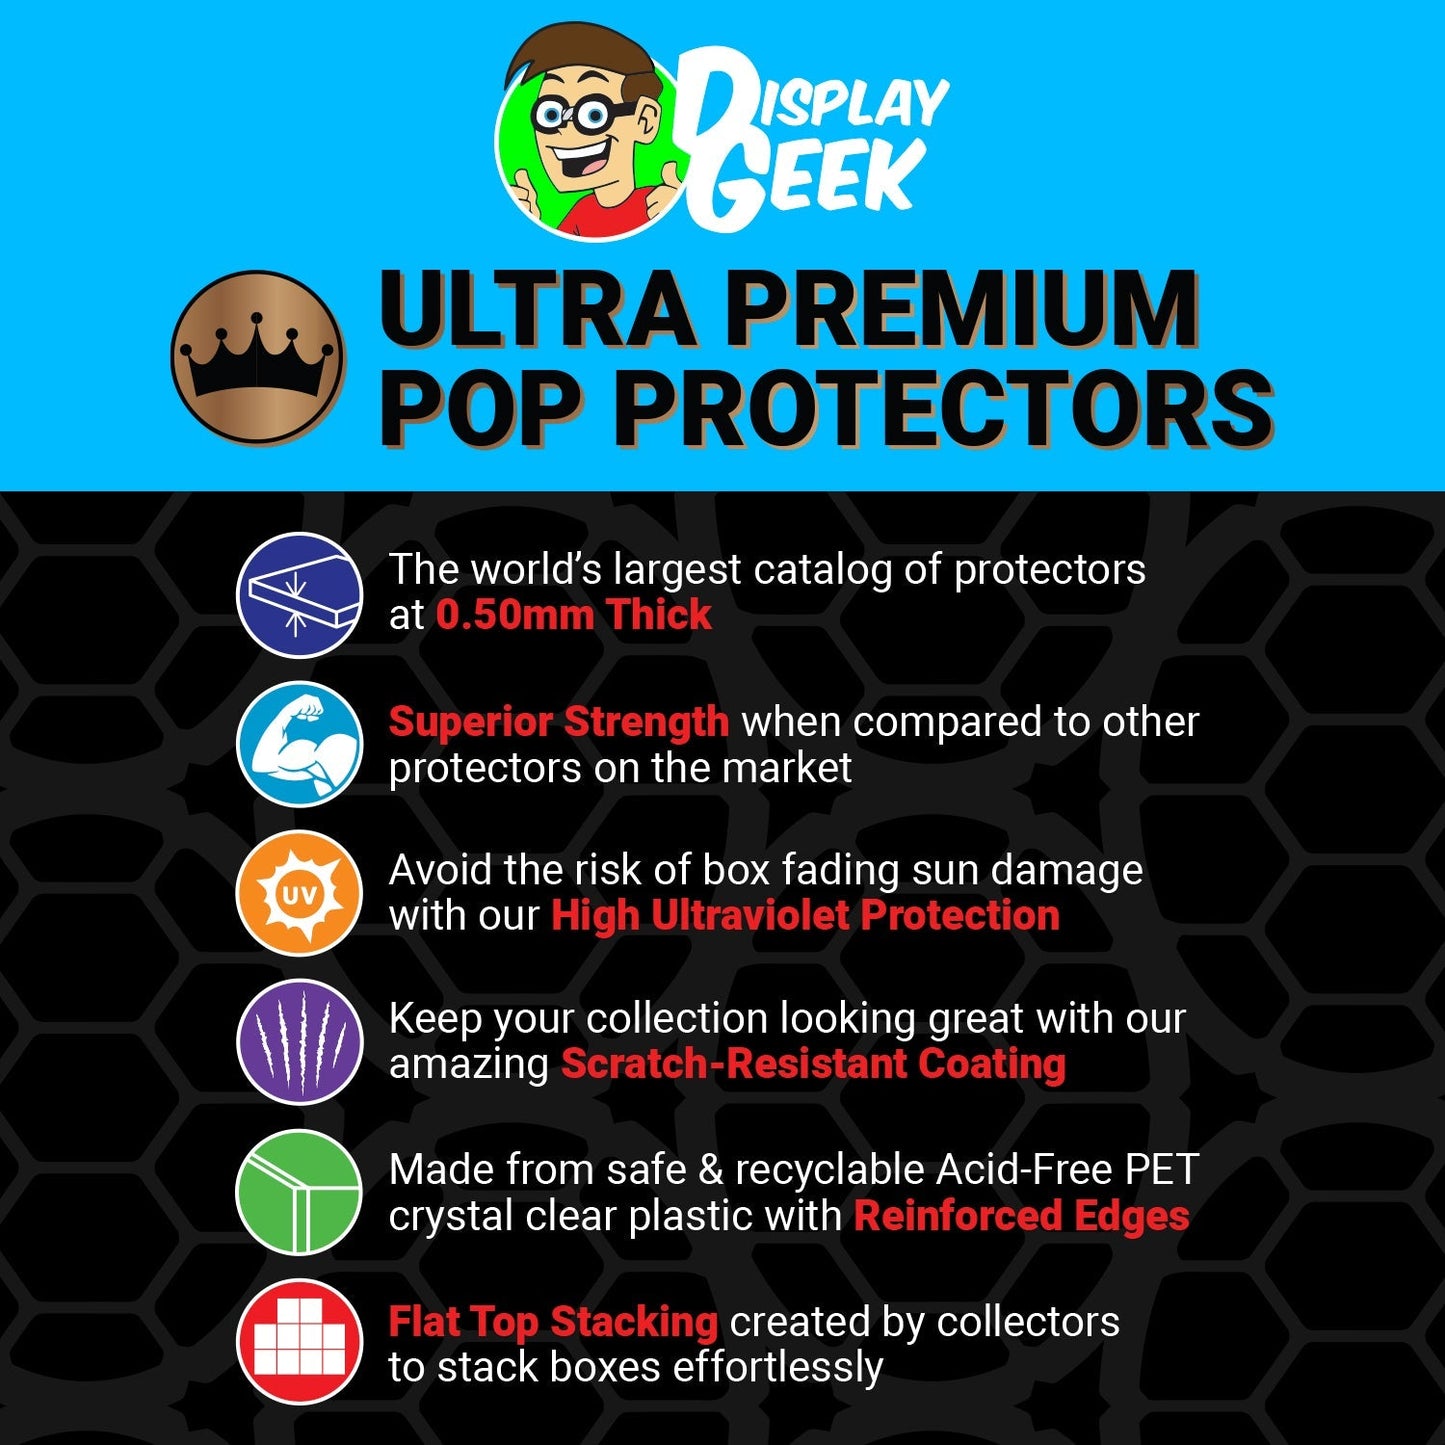 Pop Protector for Hercules #09 Funko Pop VHS Covers - PPG Pop Protector Guide Search Created by Display Geek